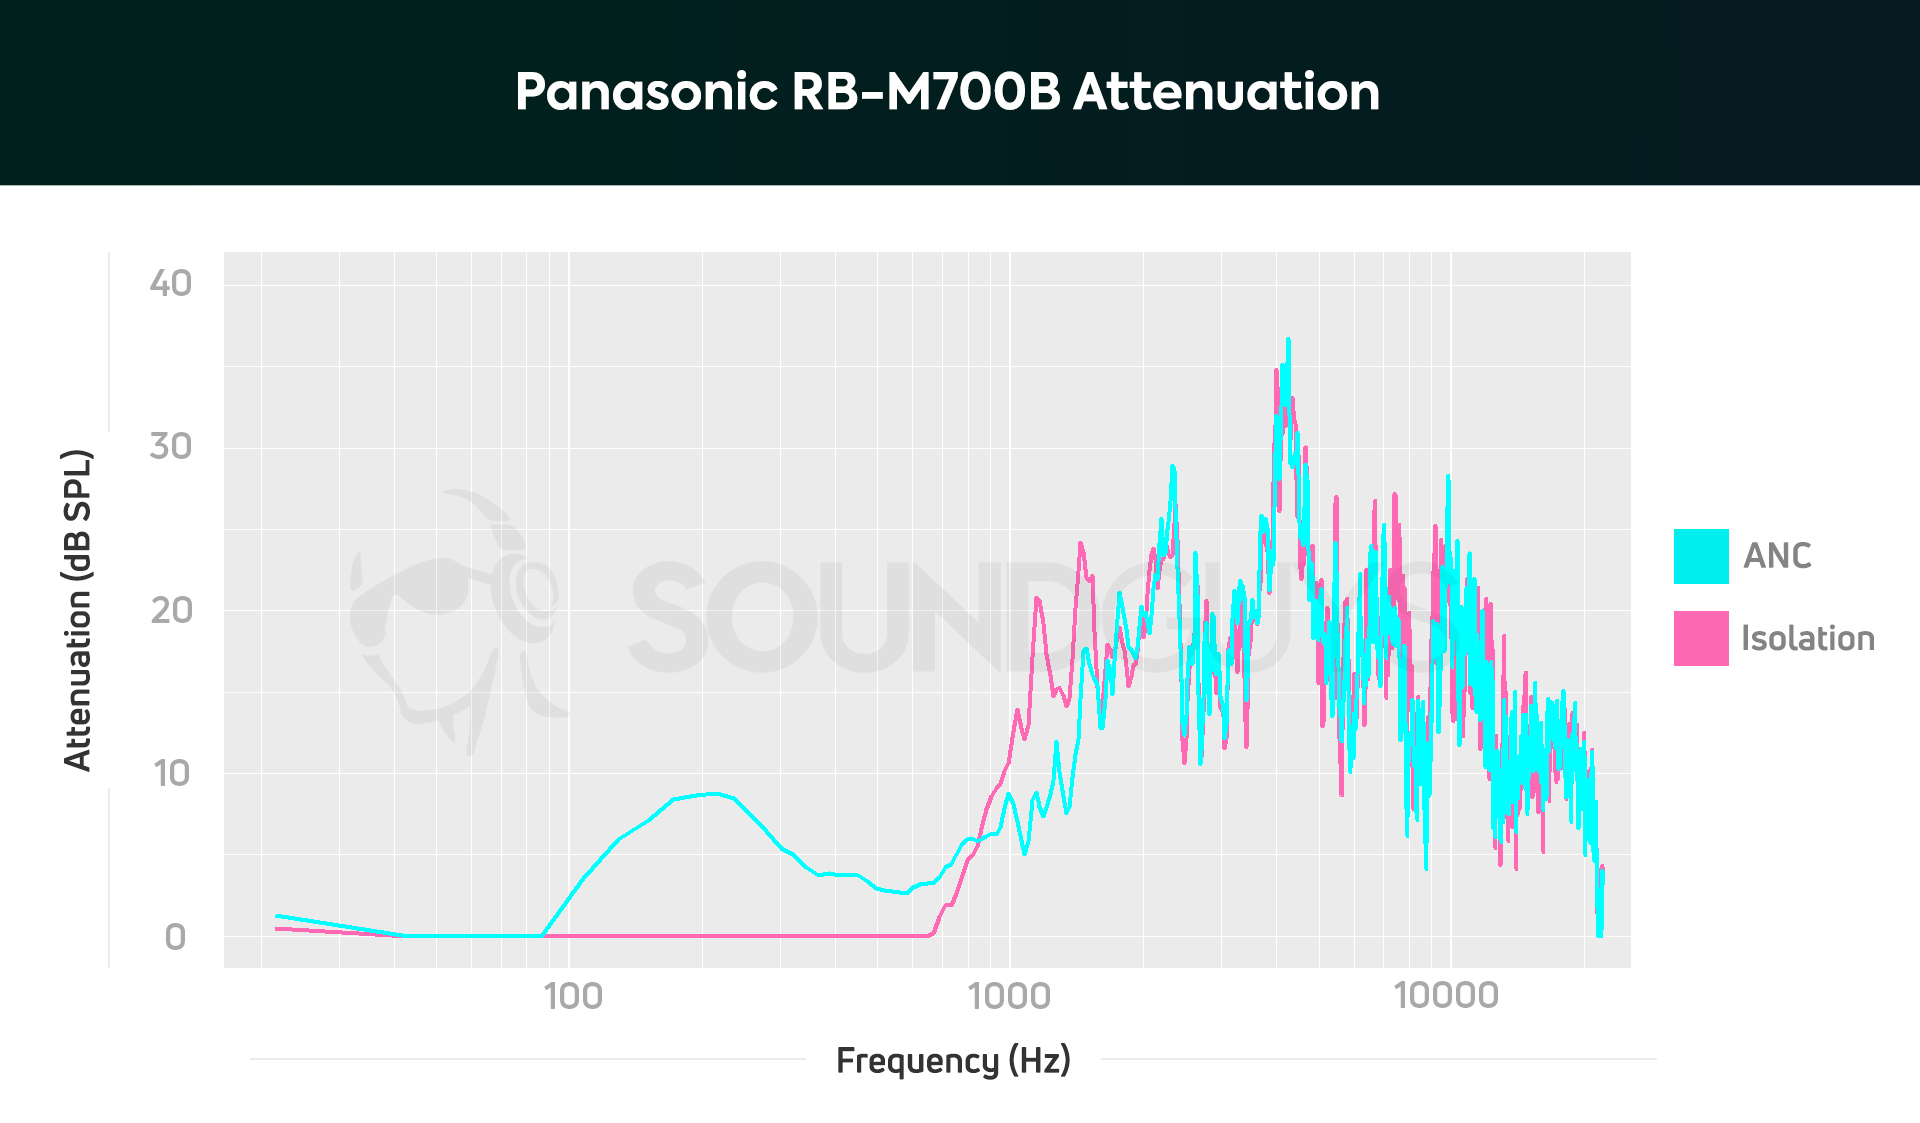 Panasonic RB-M700B attenuation graph showing when noise canceling is on there is a decrease is outside sound between 100-1000Hz.